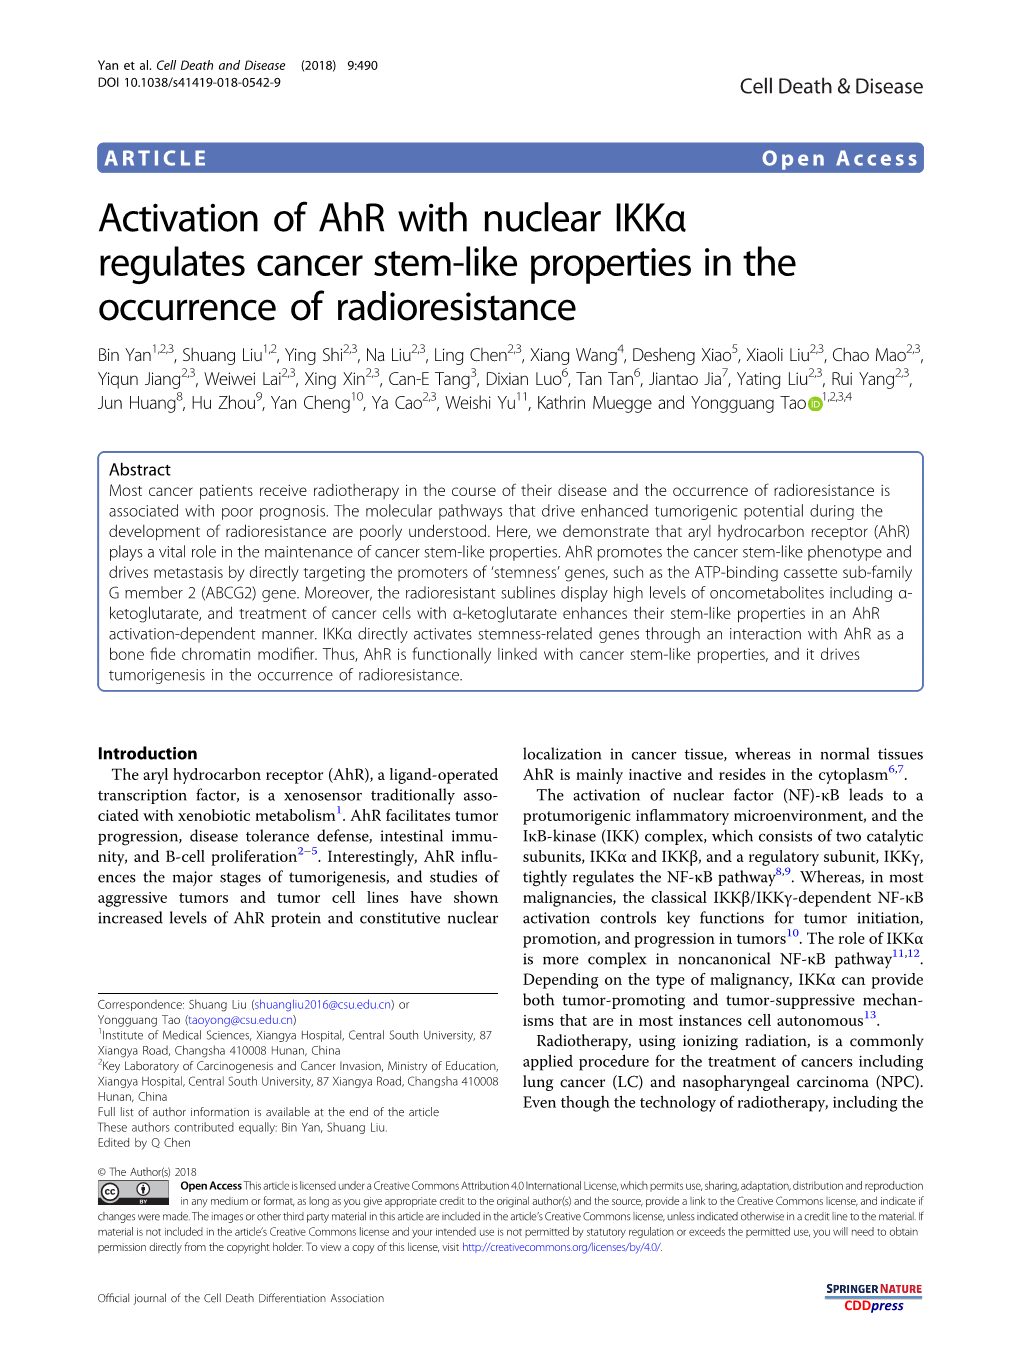 Activation of Ahr with Nuclear Ikkα Regulates Cancer Stem-Like